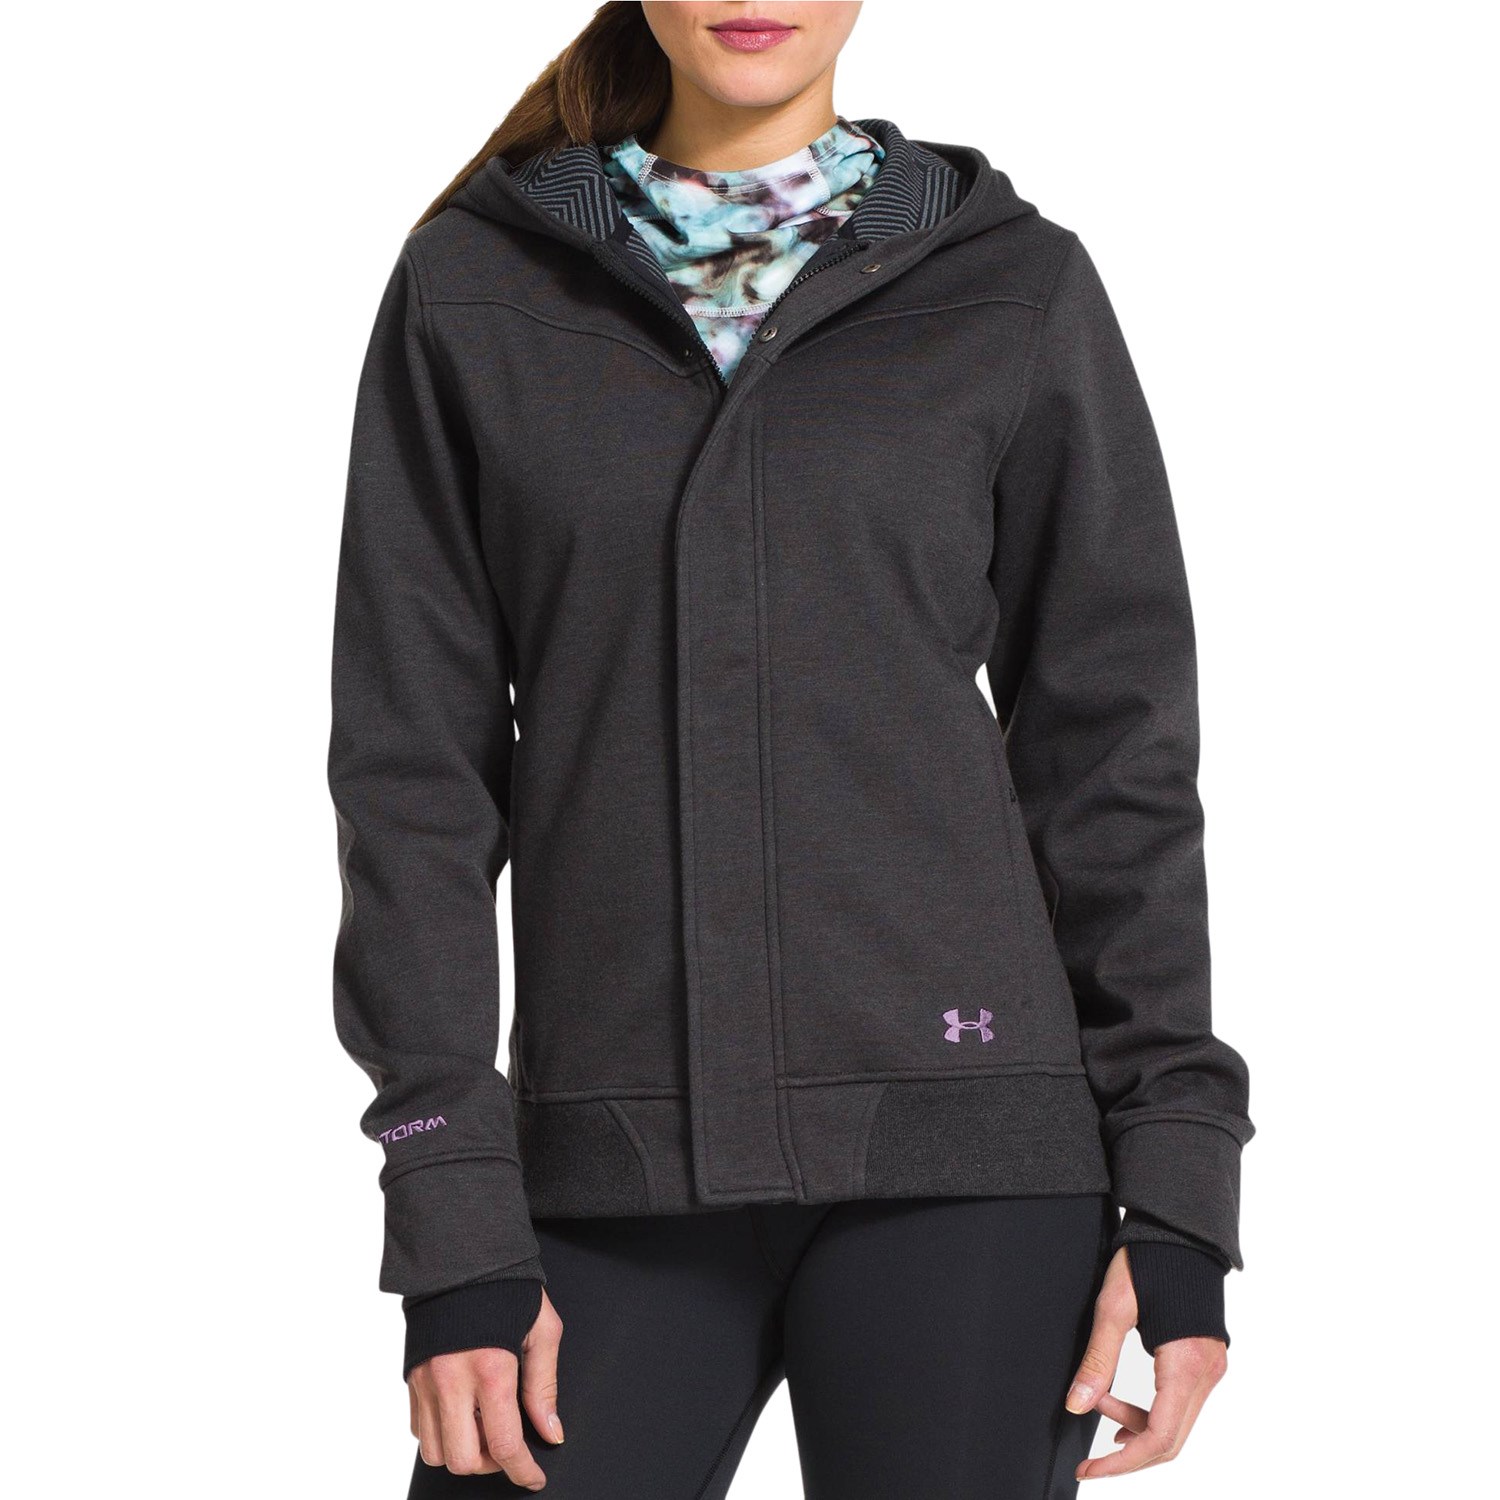 Under Armour Cold Gear Womens Small Loose Hoodie Hooded Sweatshirt